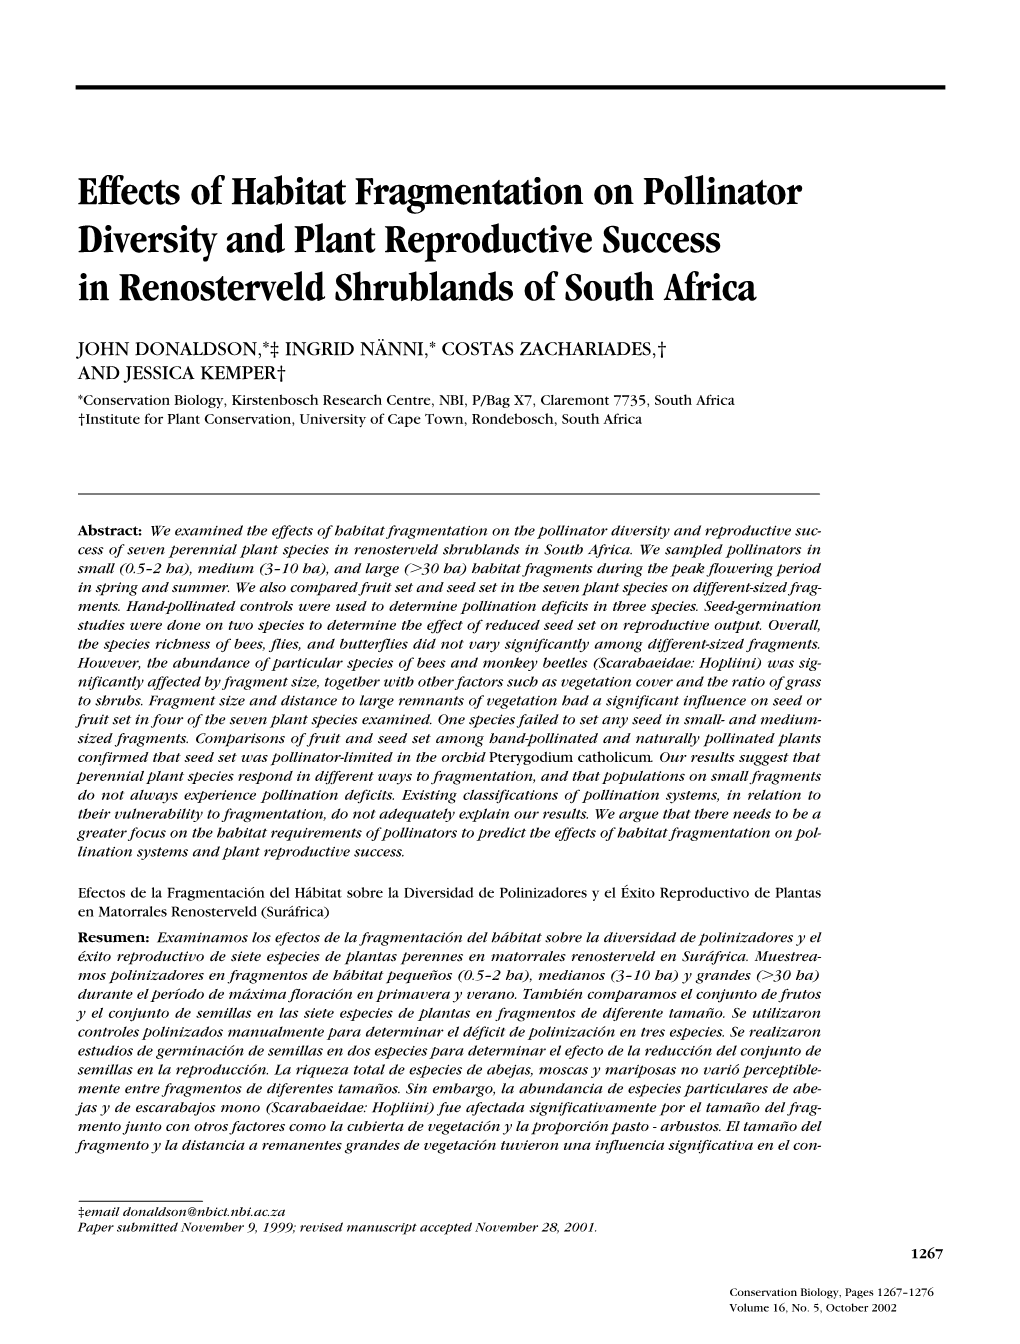 Effects of Habitat Fragmentation on Pollinator Diversity and Plant Reproductive Success in Renosterveld Shrublands of South Africa